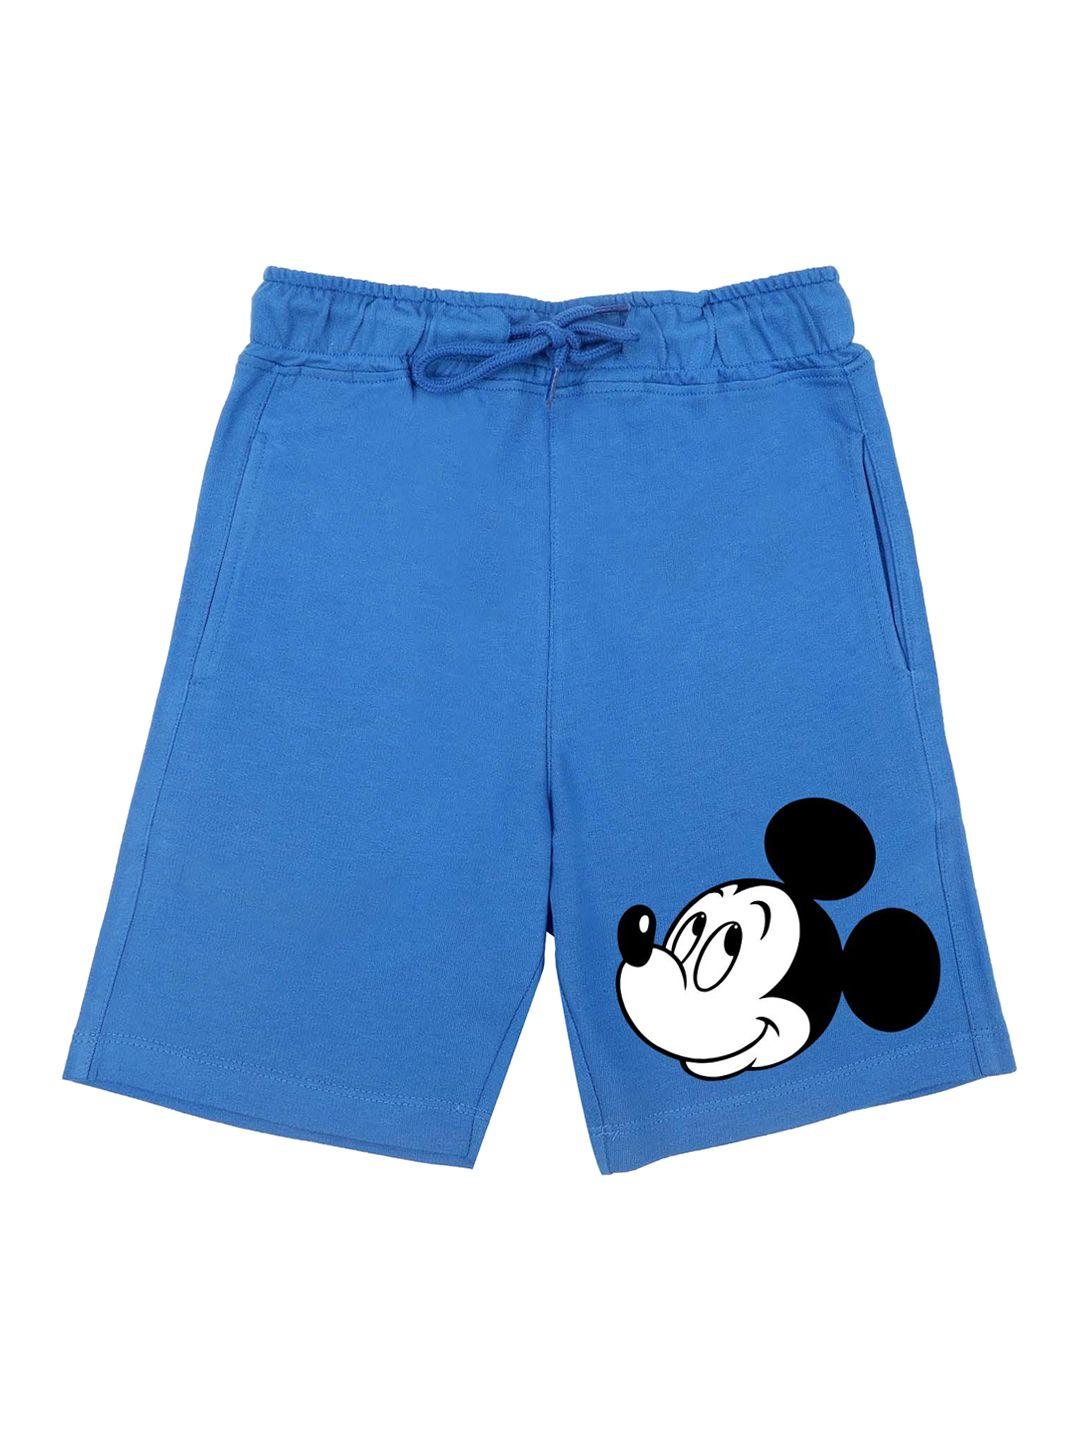 disney-by-wear-your-mind-boys-blue-printed-mickey-mouse-shorts